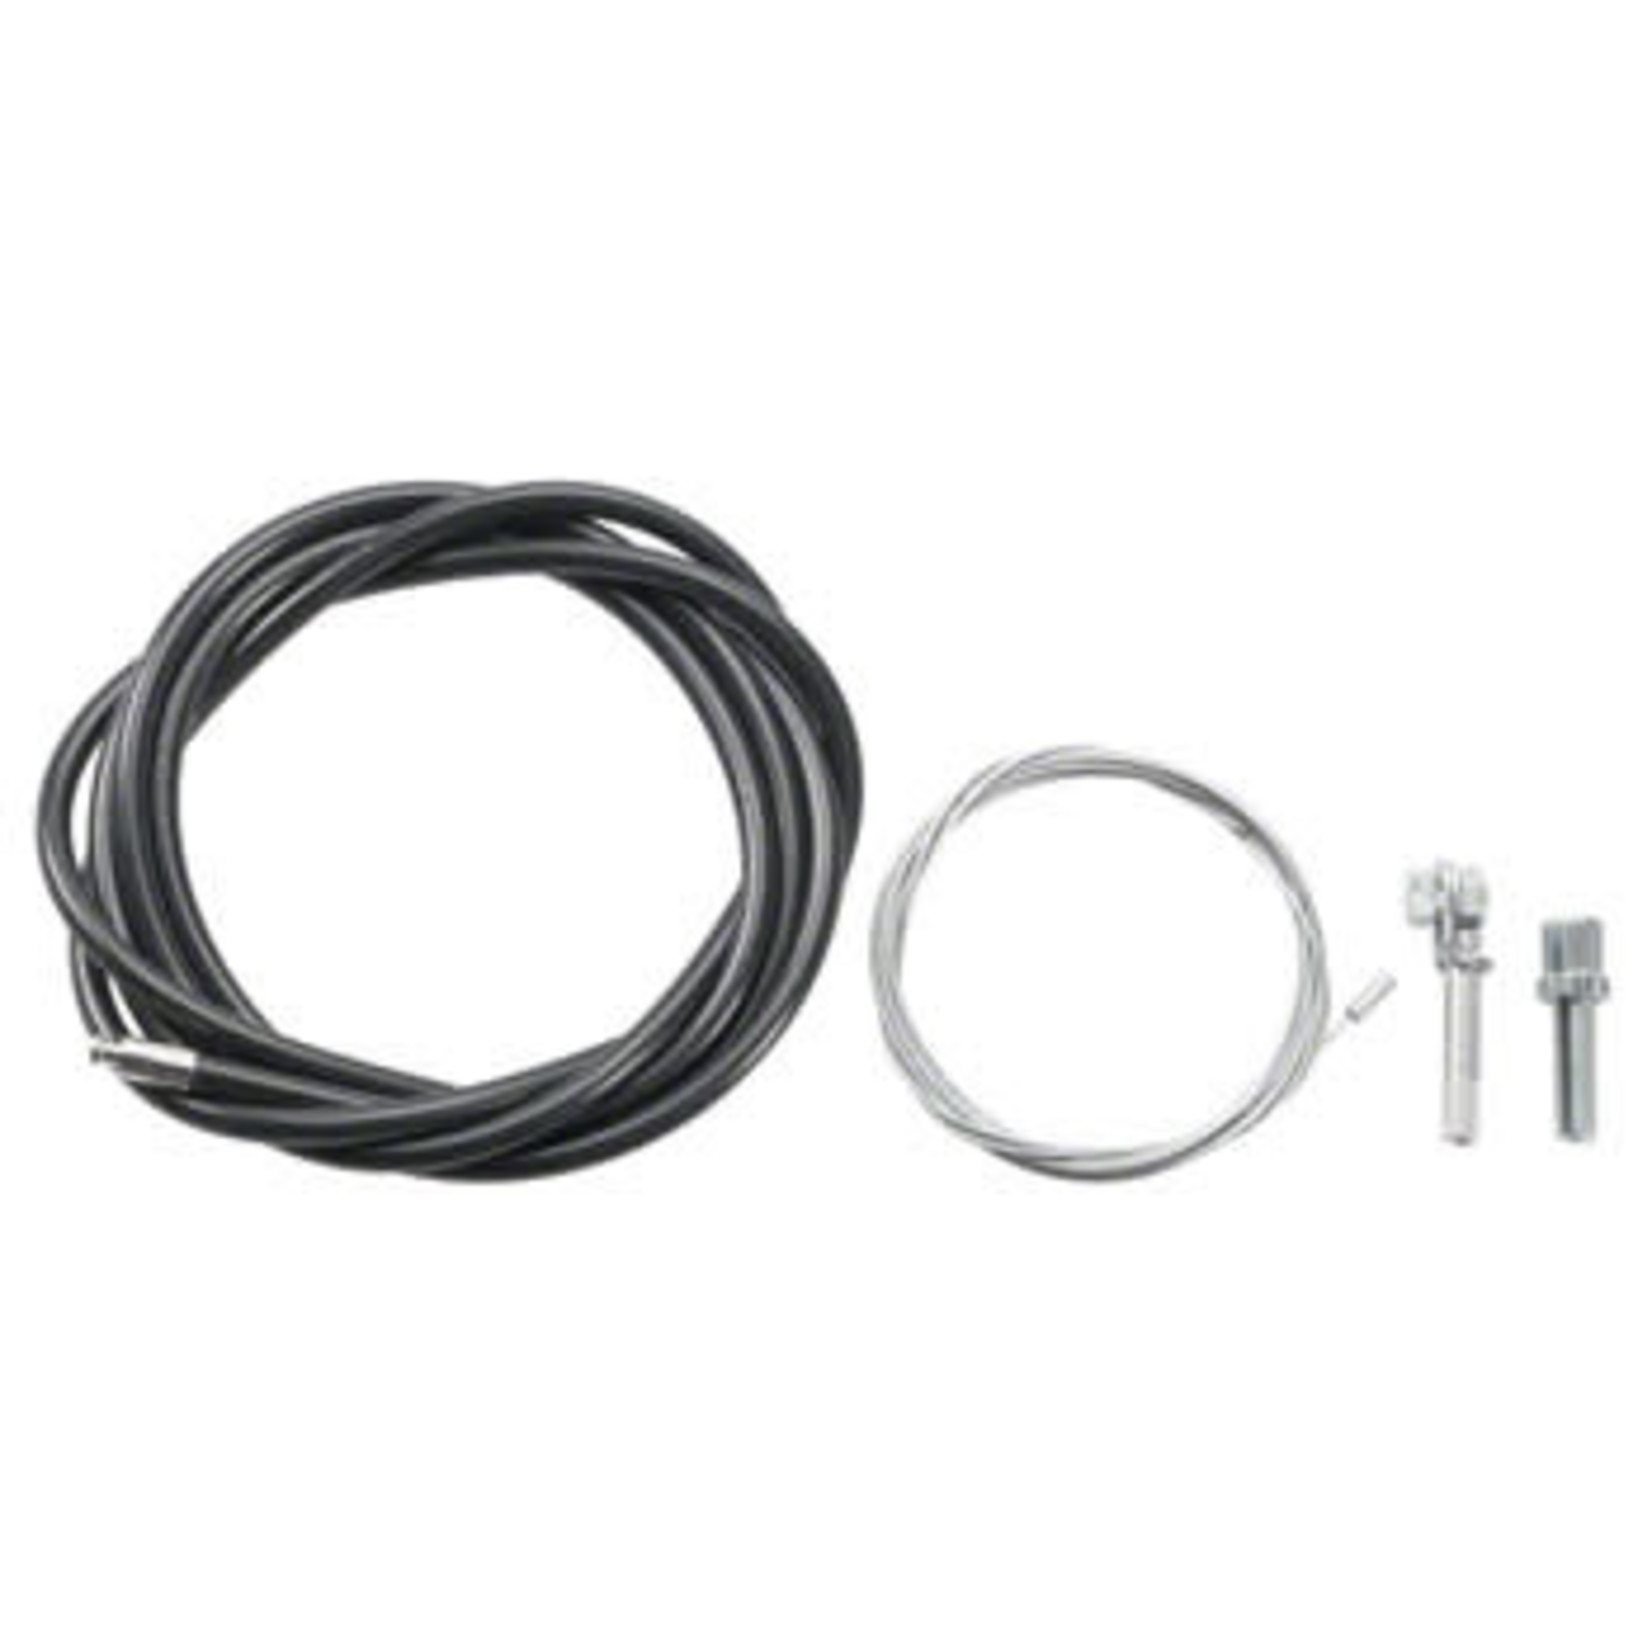 Sturmey Archer Classic Trigger Shift Cable 1570mm